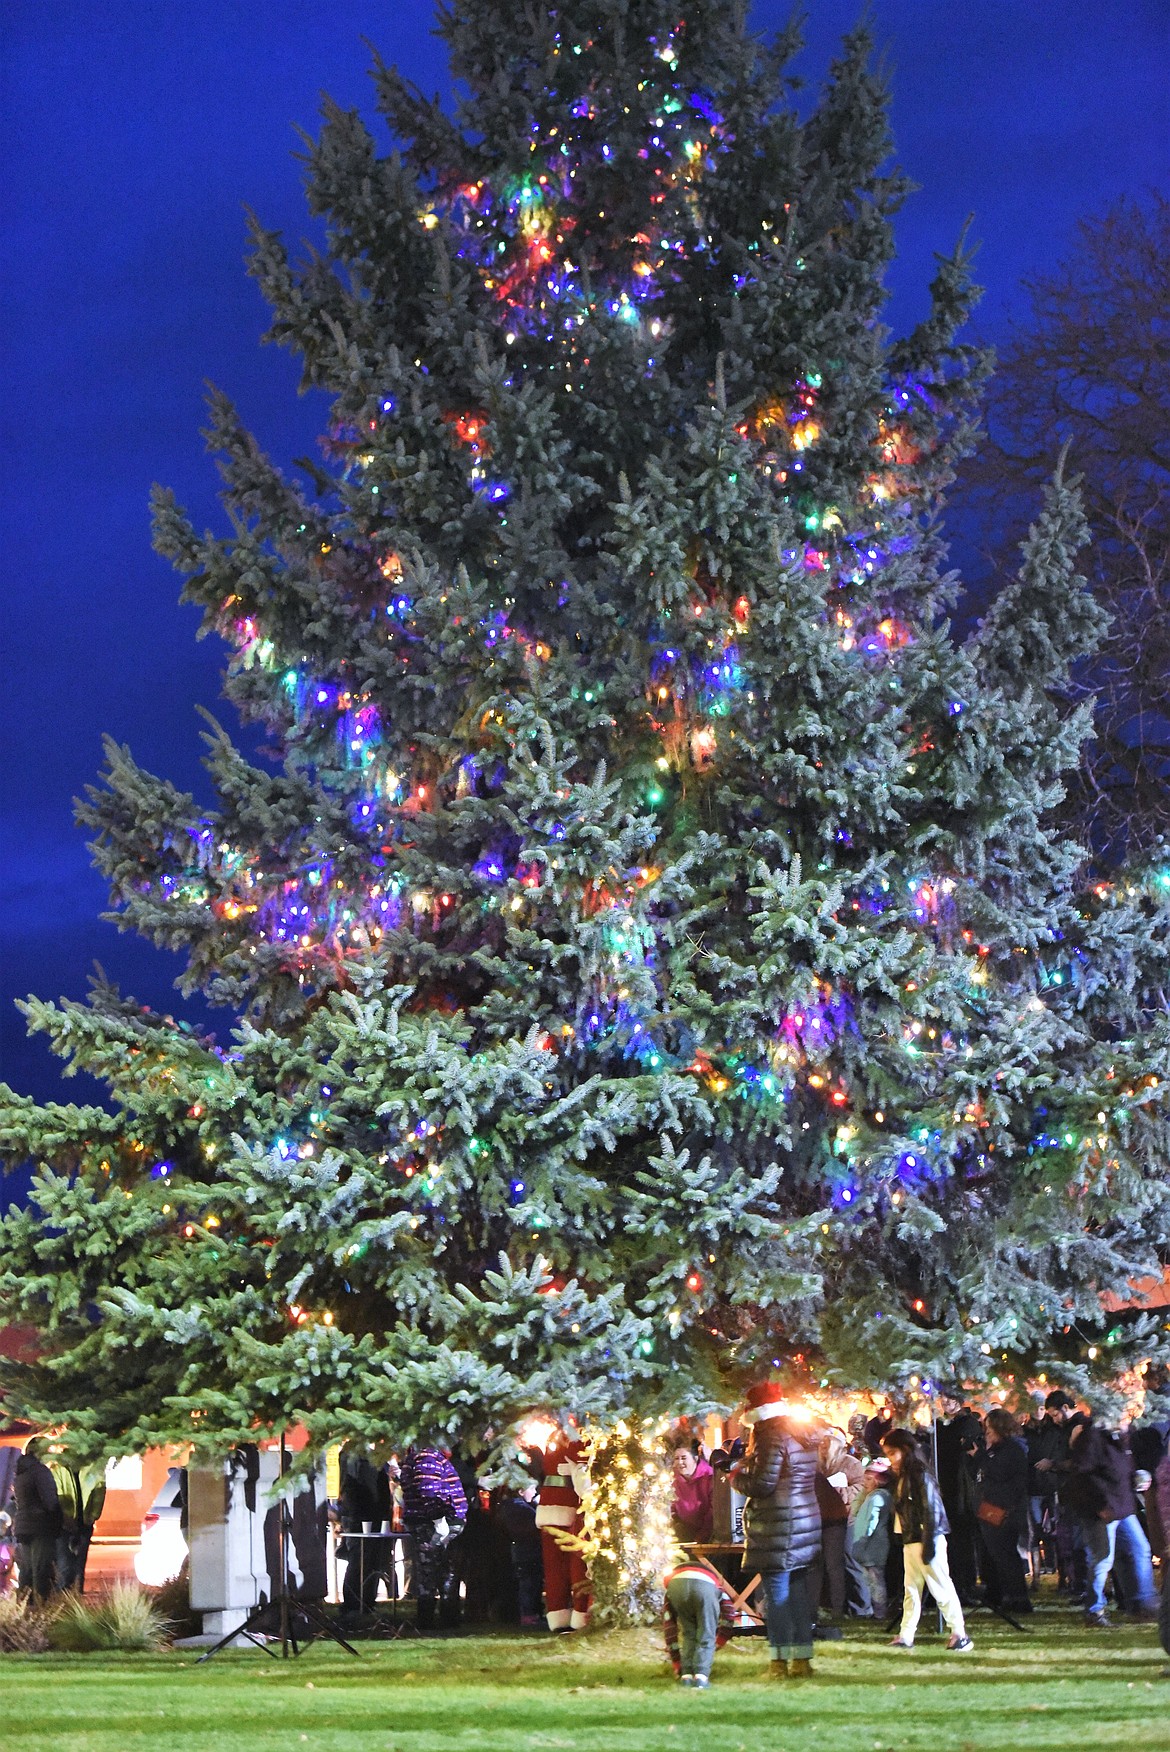 A tree on the corner of the Lake County Courthouse lawn was illuminated with Christmas lights. (Scot Heisel/Lake County Leader)